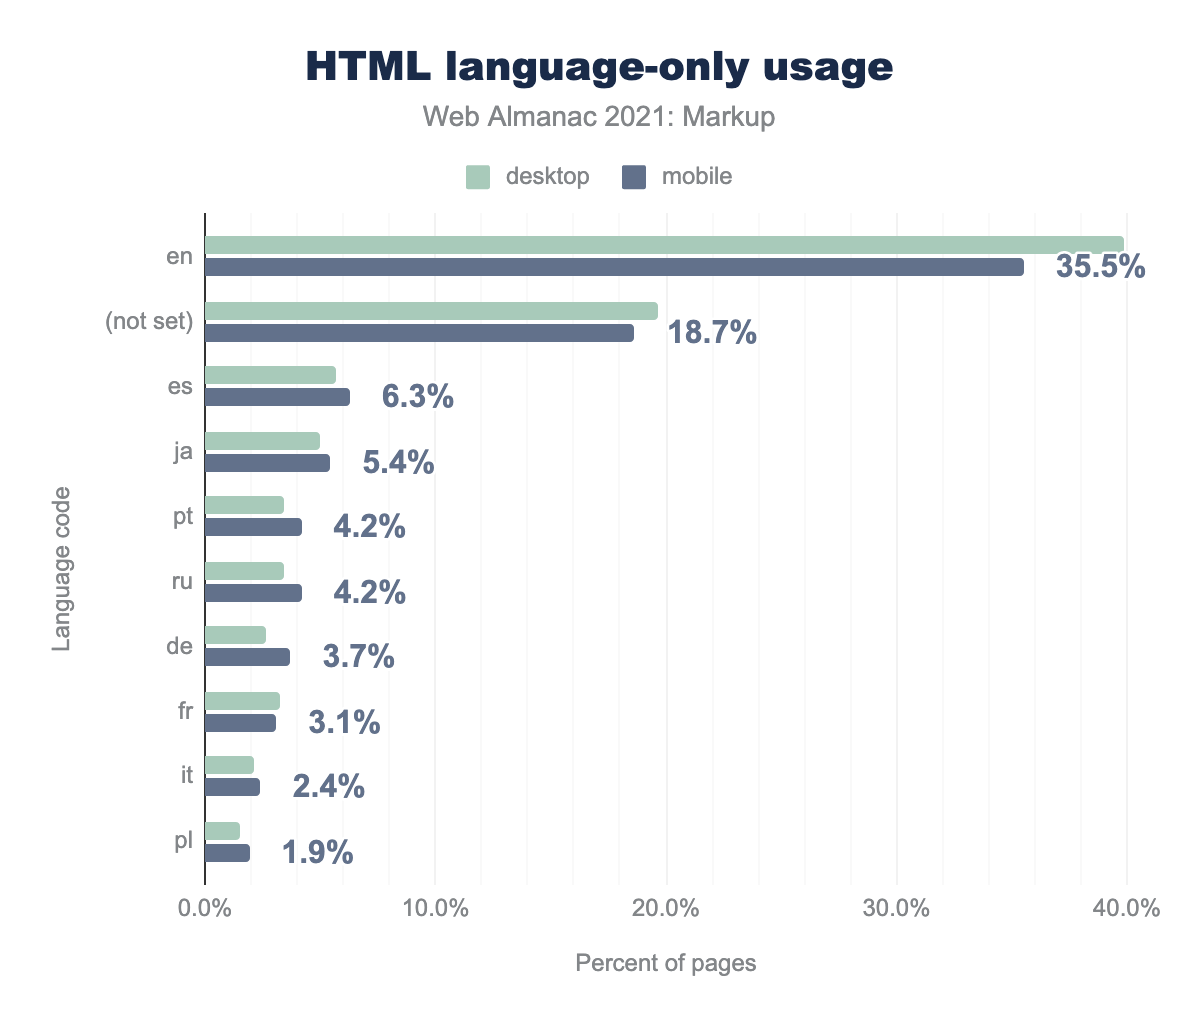 Adoption of the most popular HTML language codes, not including region.